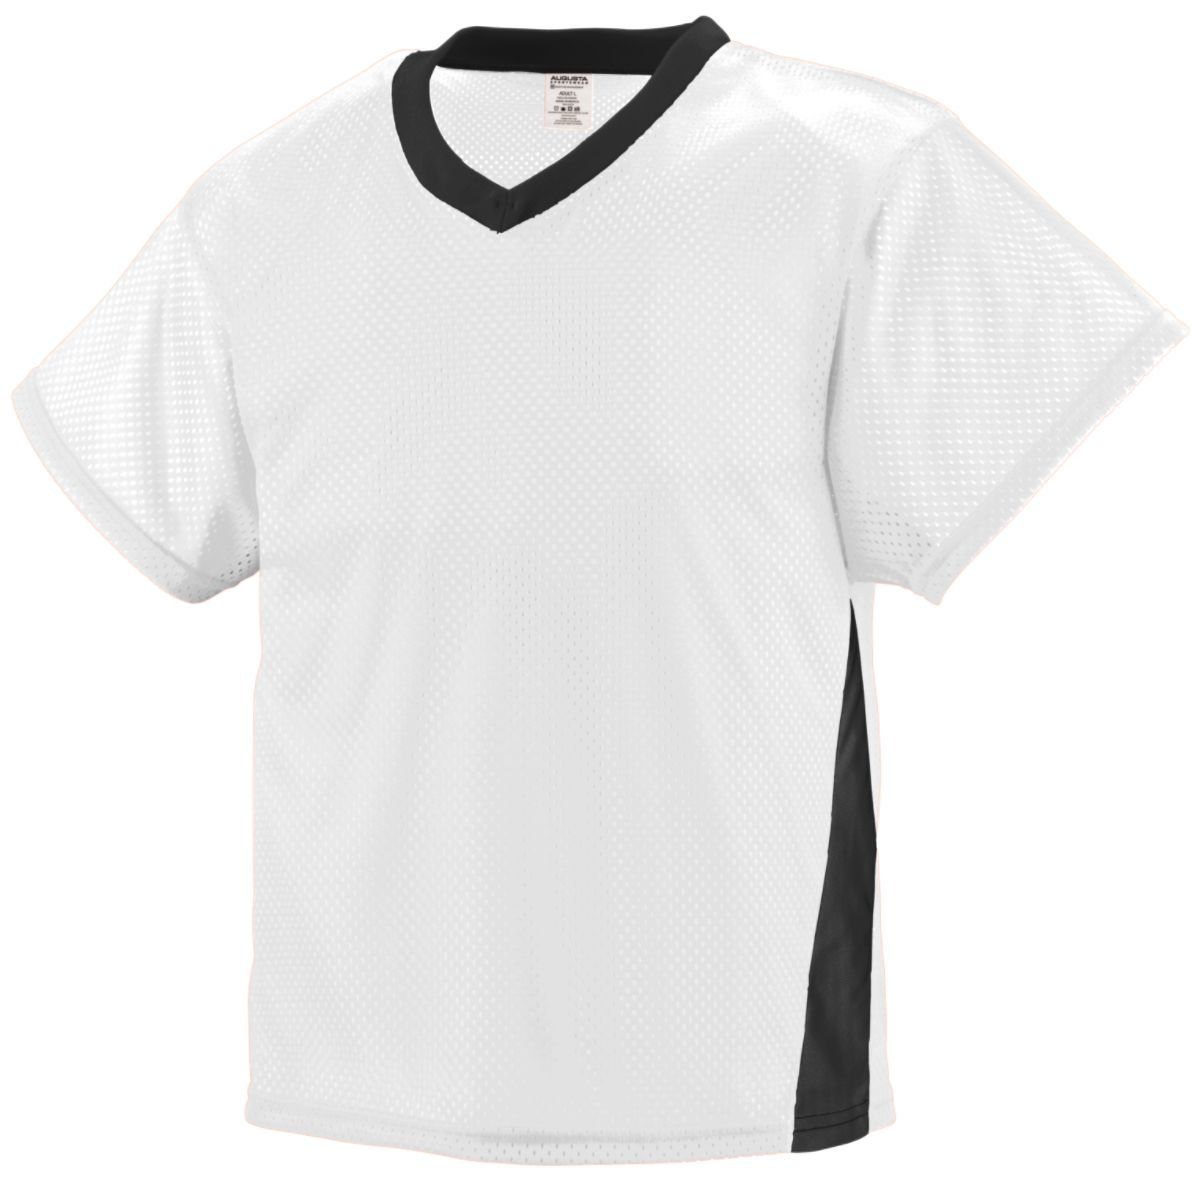 Augusta Sportswear High Score Jersey in White/Black  -Part of the Adult, Adult-Jersey, Augusta-Products, Lacrosse, Shirts, All-Sports, All-Sports-1 product lines at KanaleyCreations.com